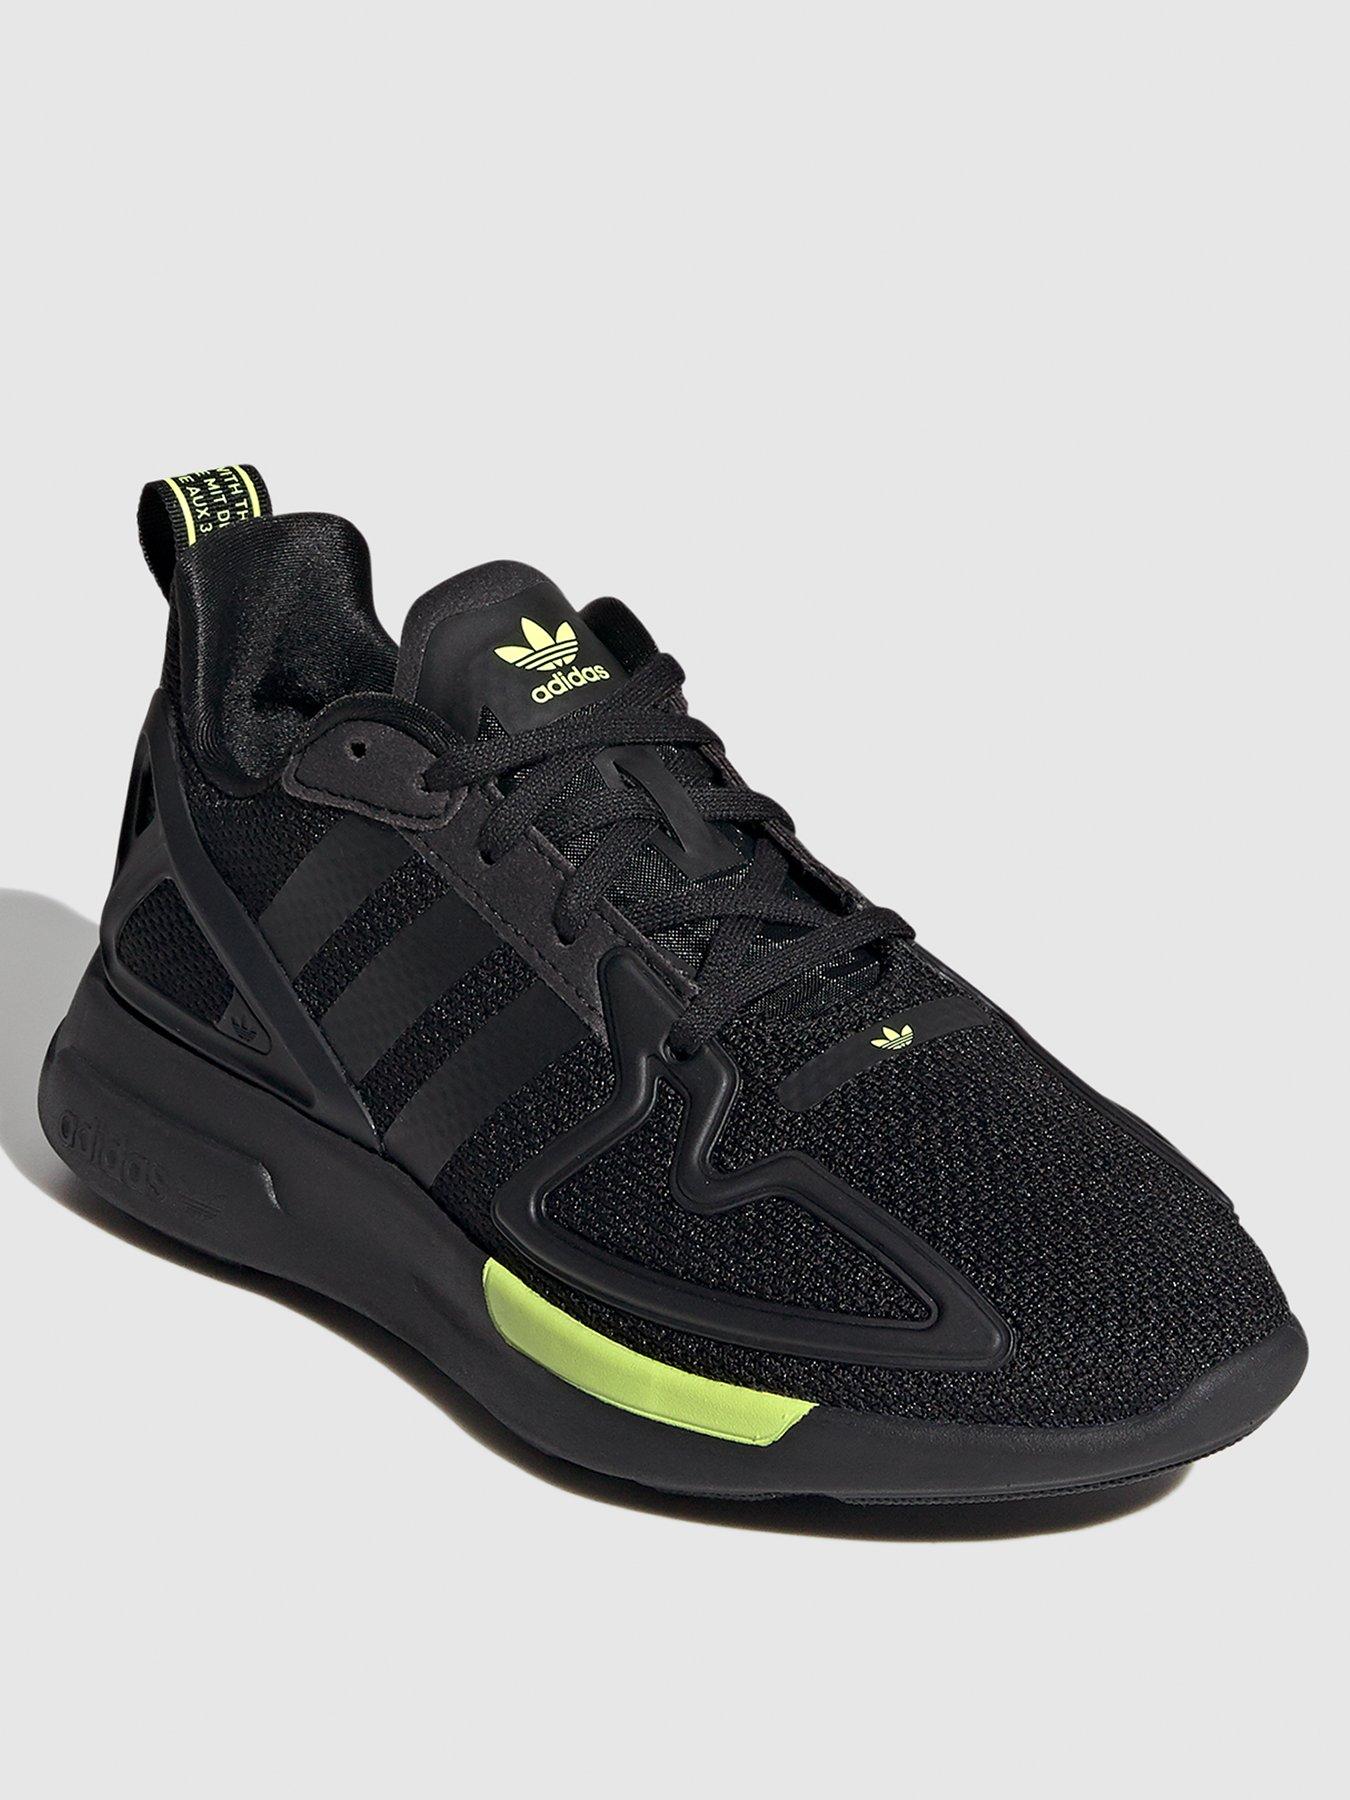 adidas zx junior trainers